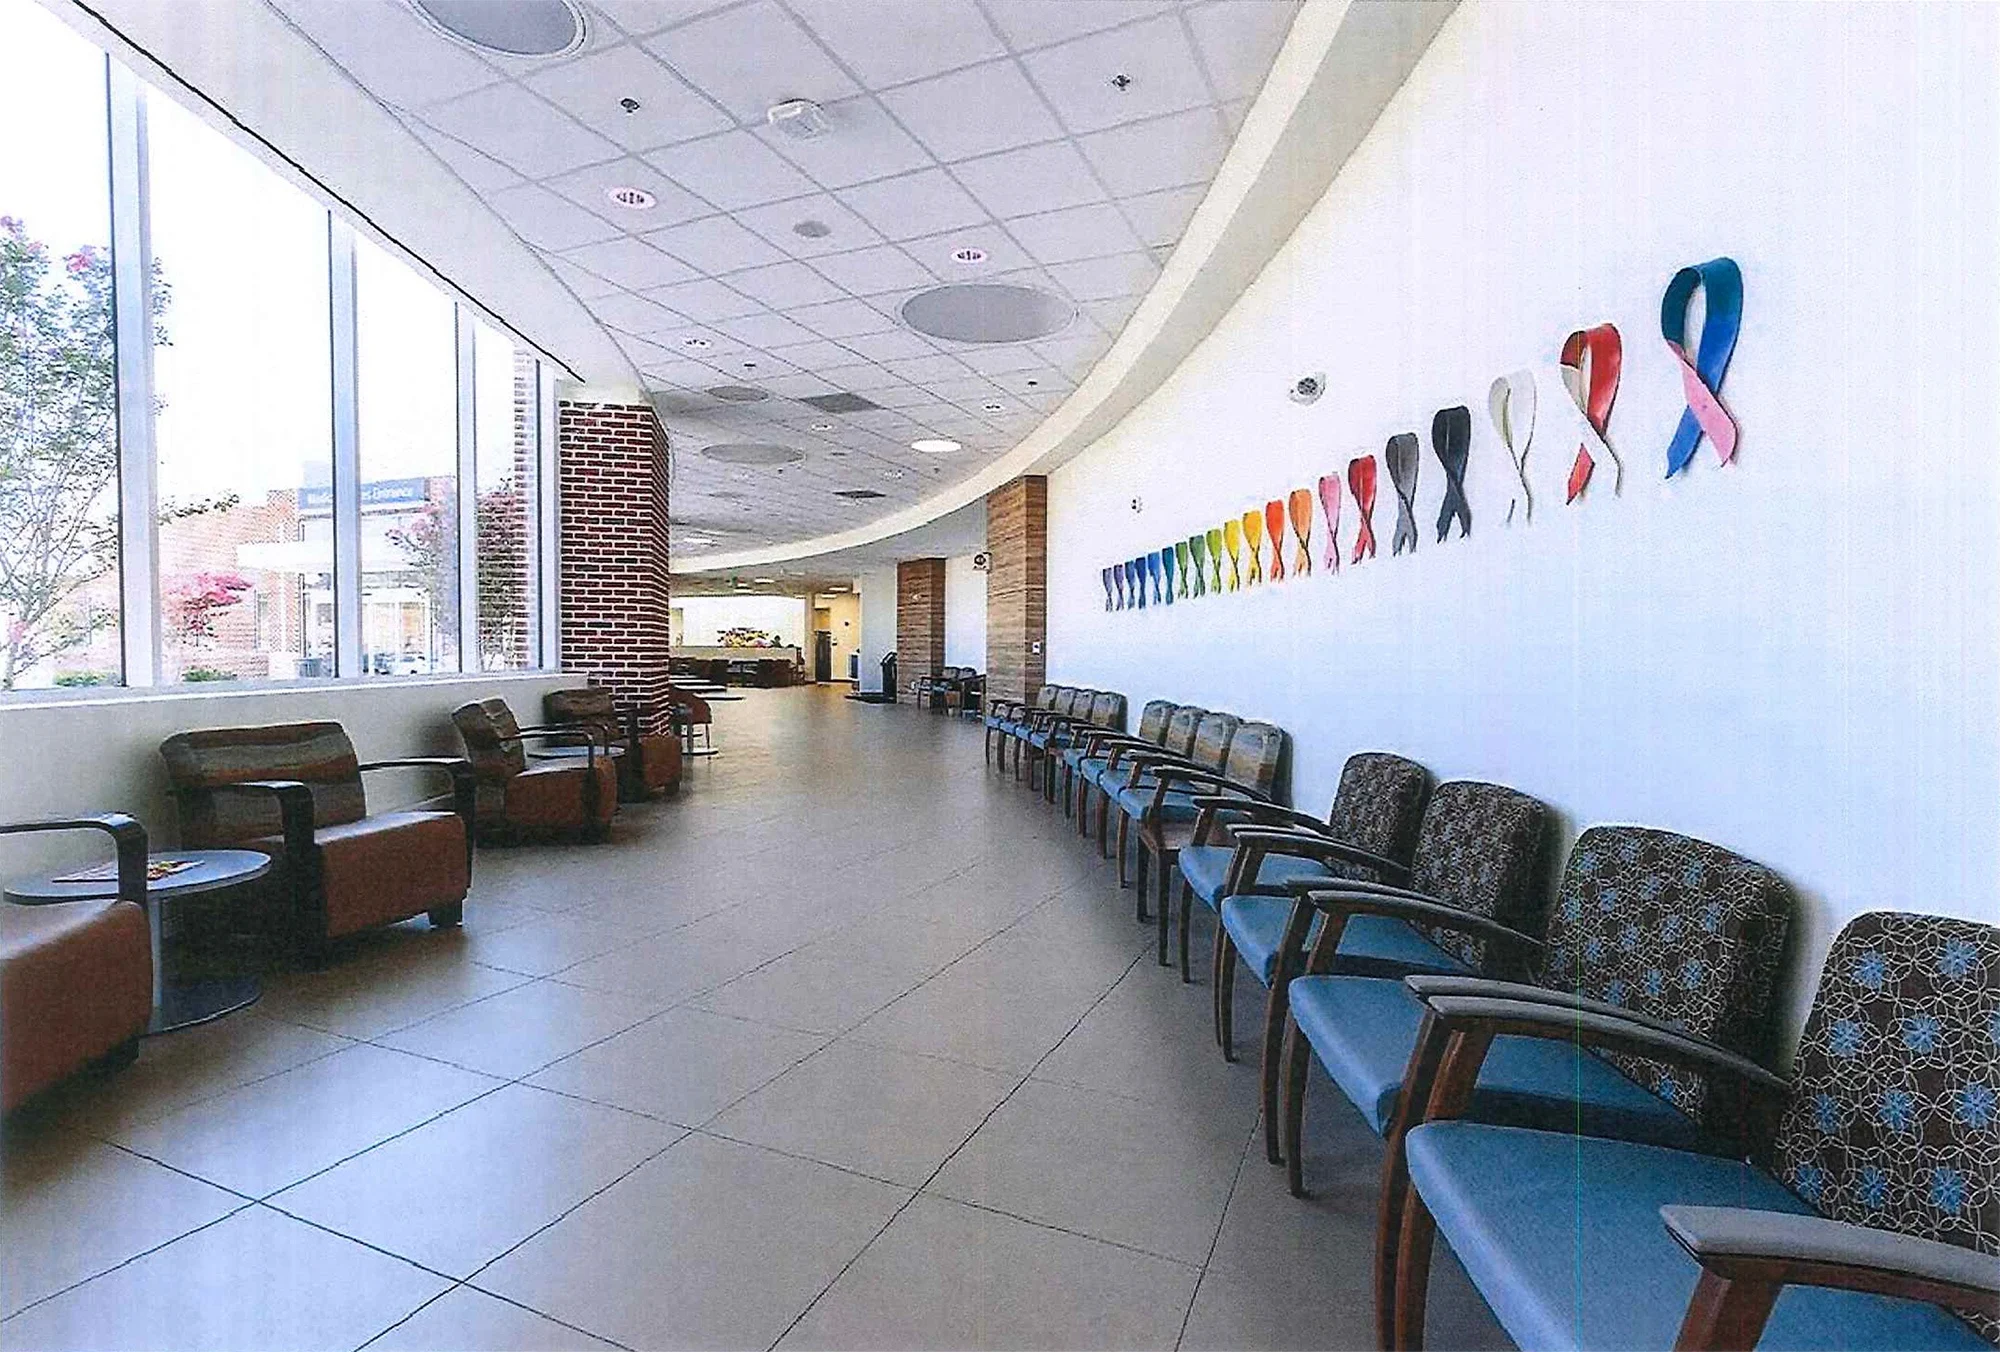 frederick's rose hill cancer center waiting area